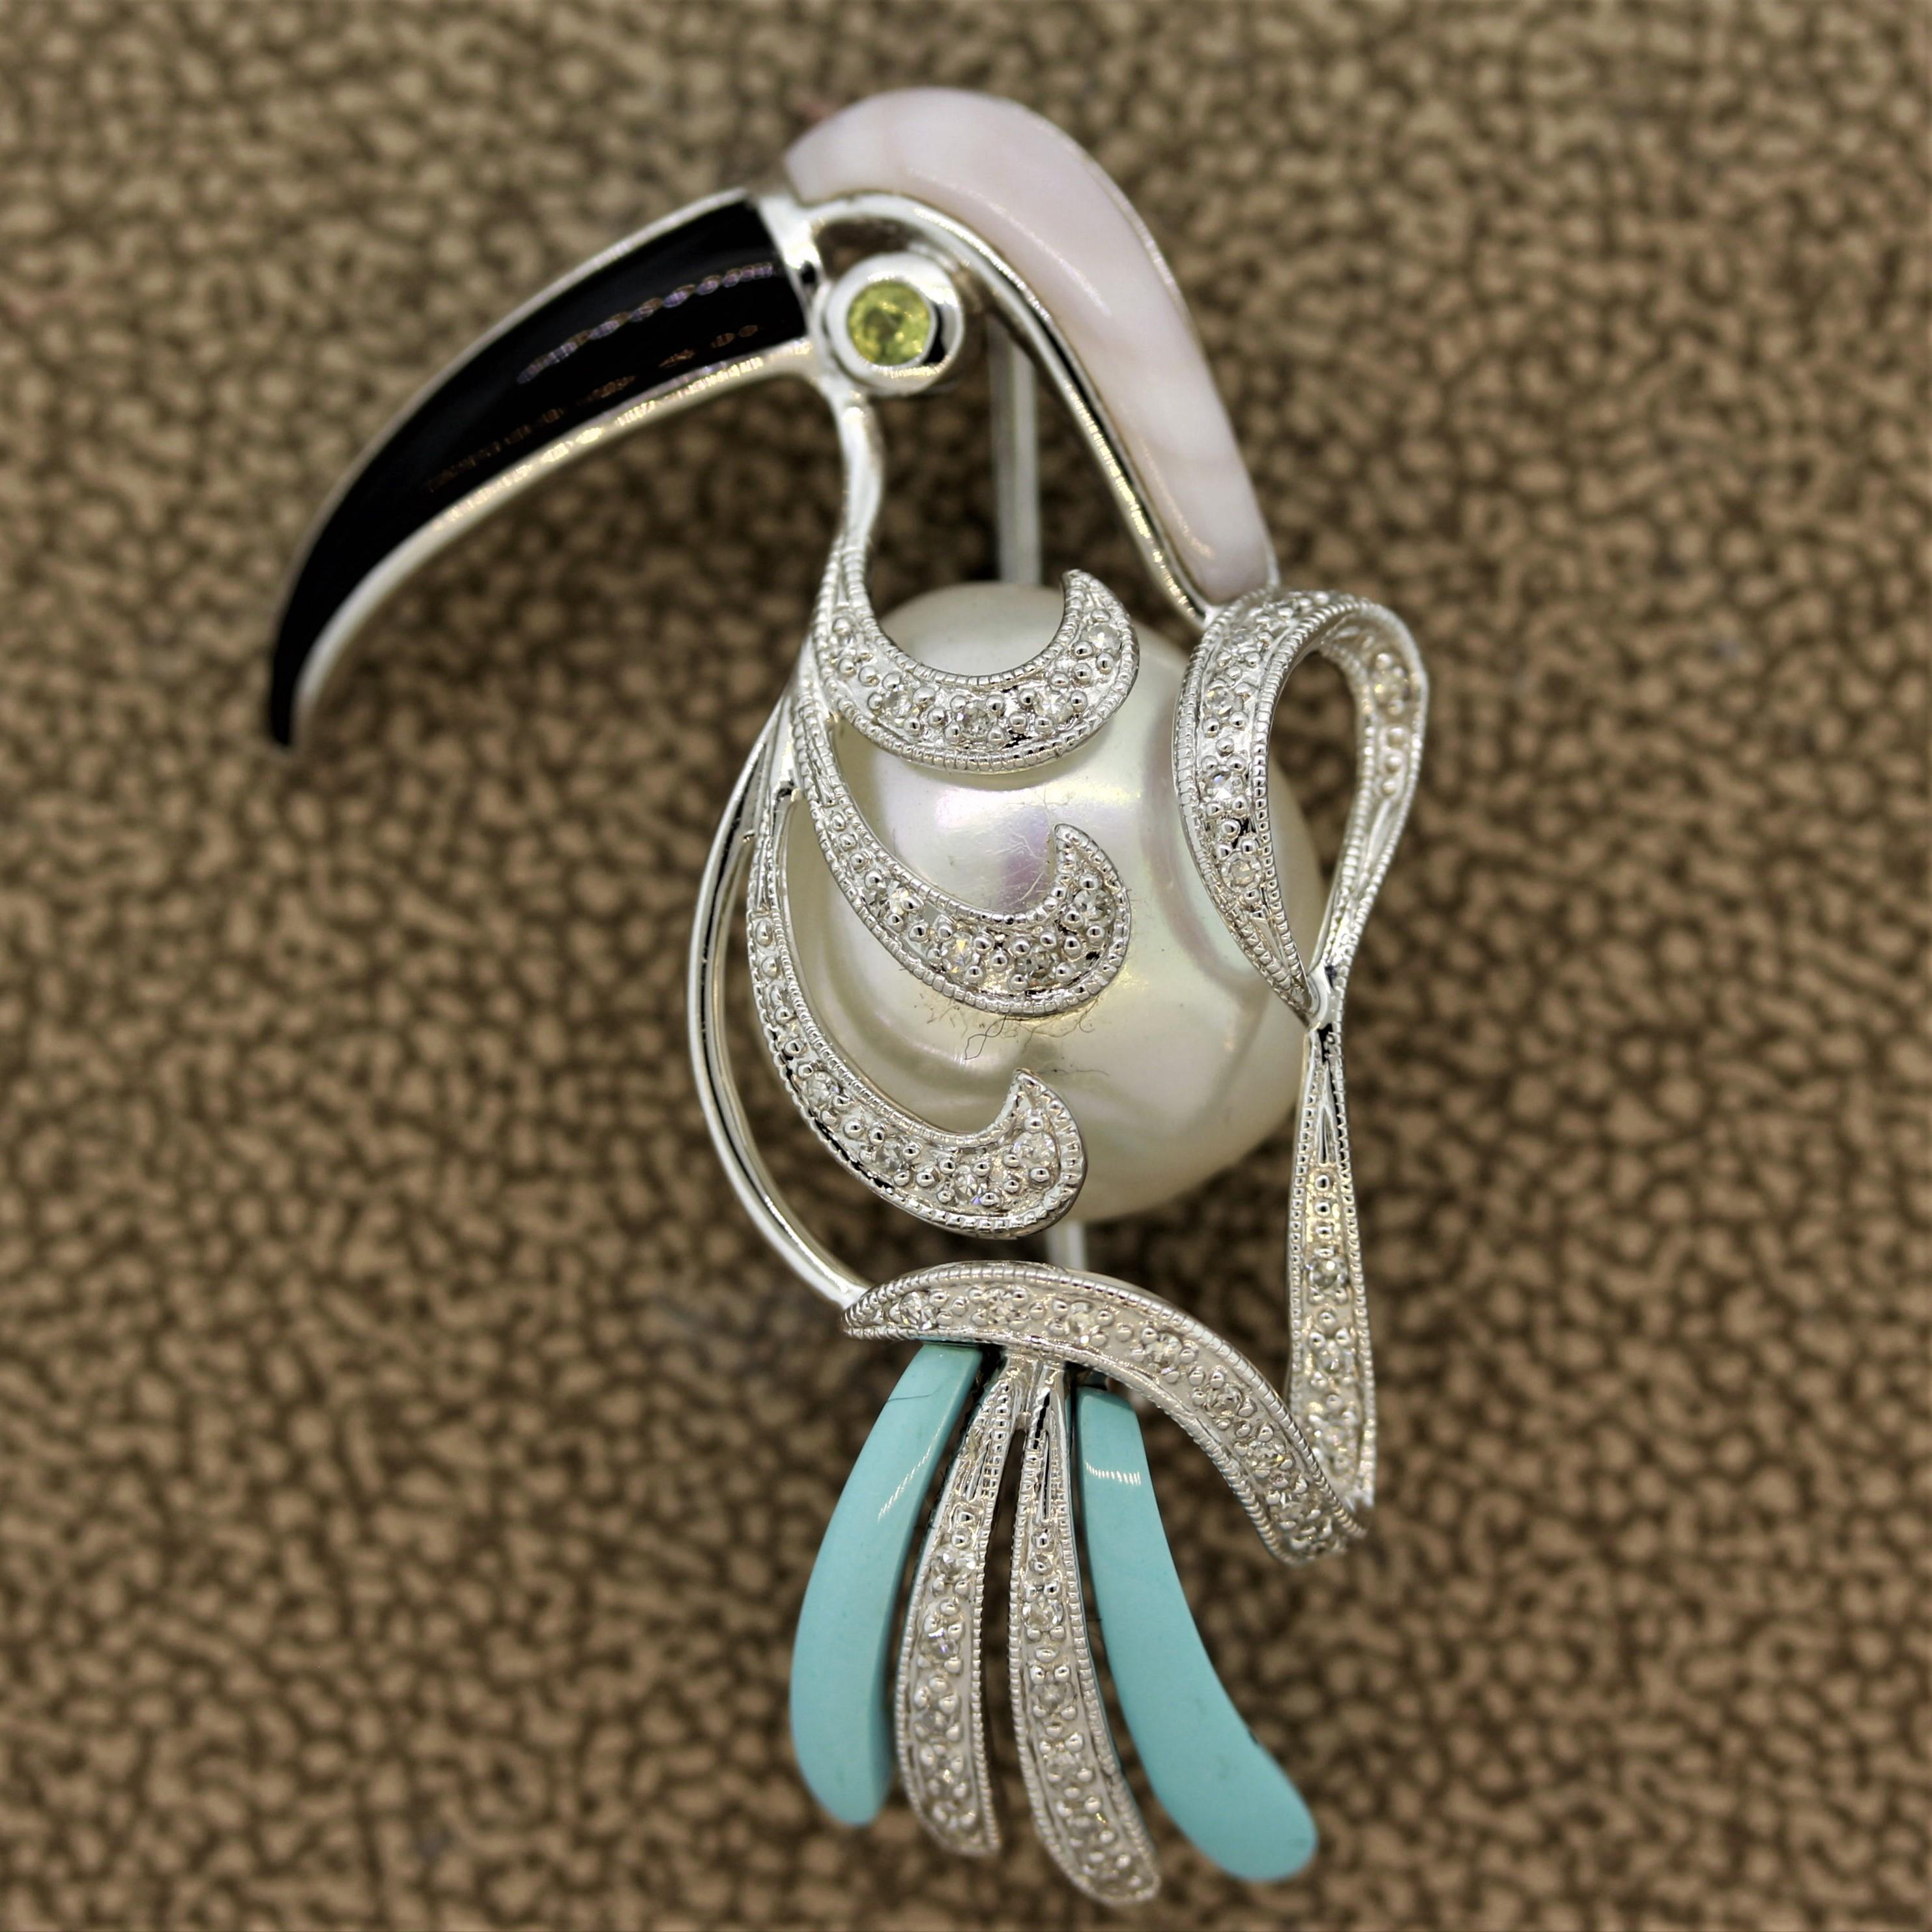 A lively Toucan is studded in diamonds and gems! It features a black onyx beak, mother of pearl head and turquoise tail along with a diamond and pearl studded body. Made in 14k white gold and ready to be worn with any outfit.

Length: 1.5 inches